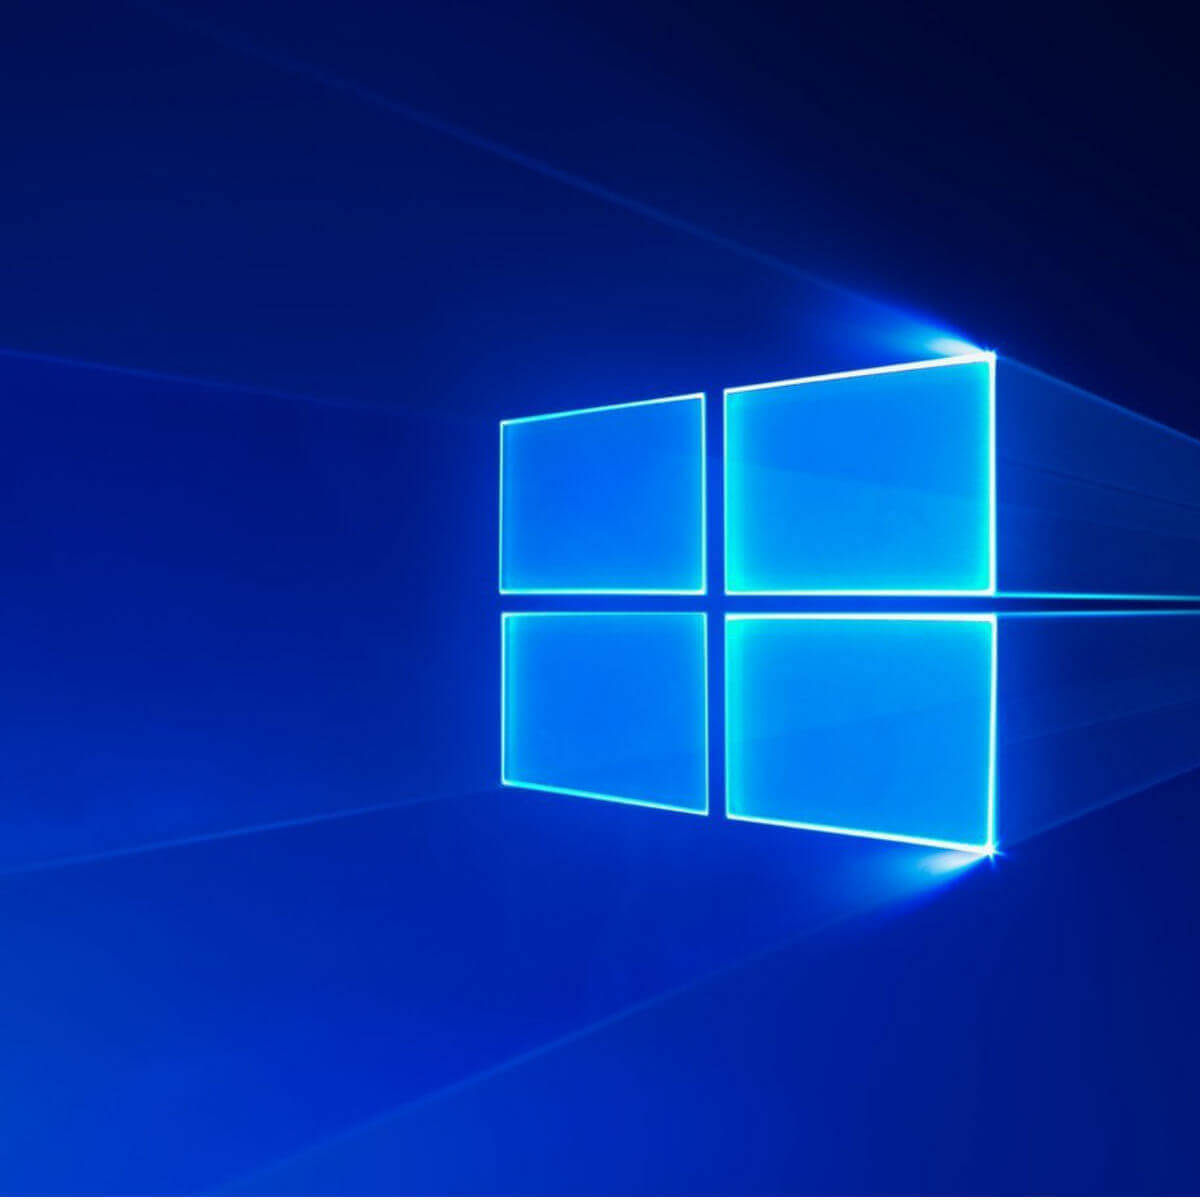 Microsoft Starts Rolling Out Windows 10 May 2019 Update Today